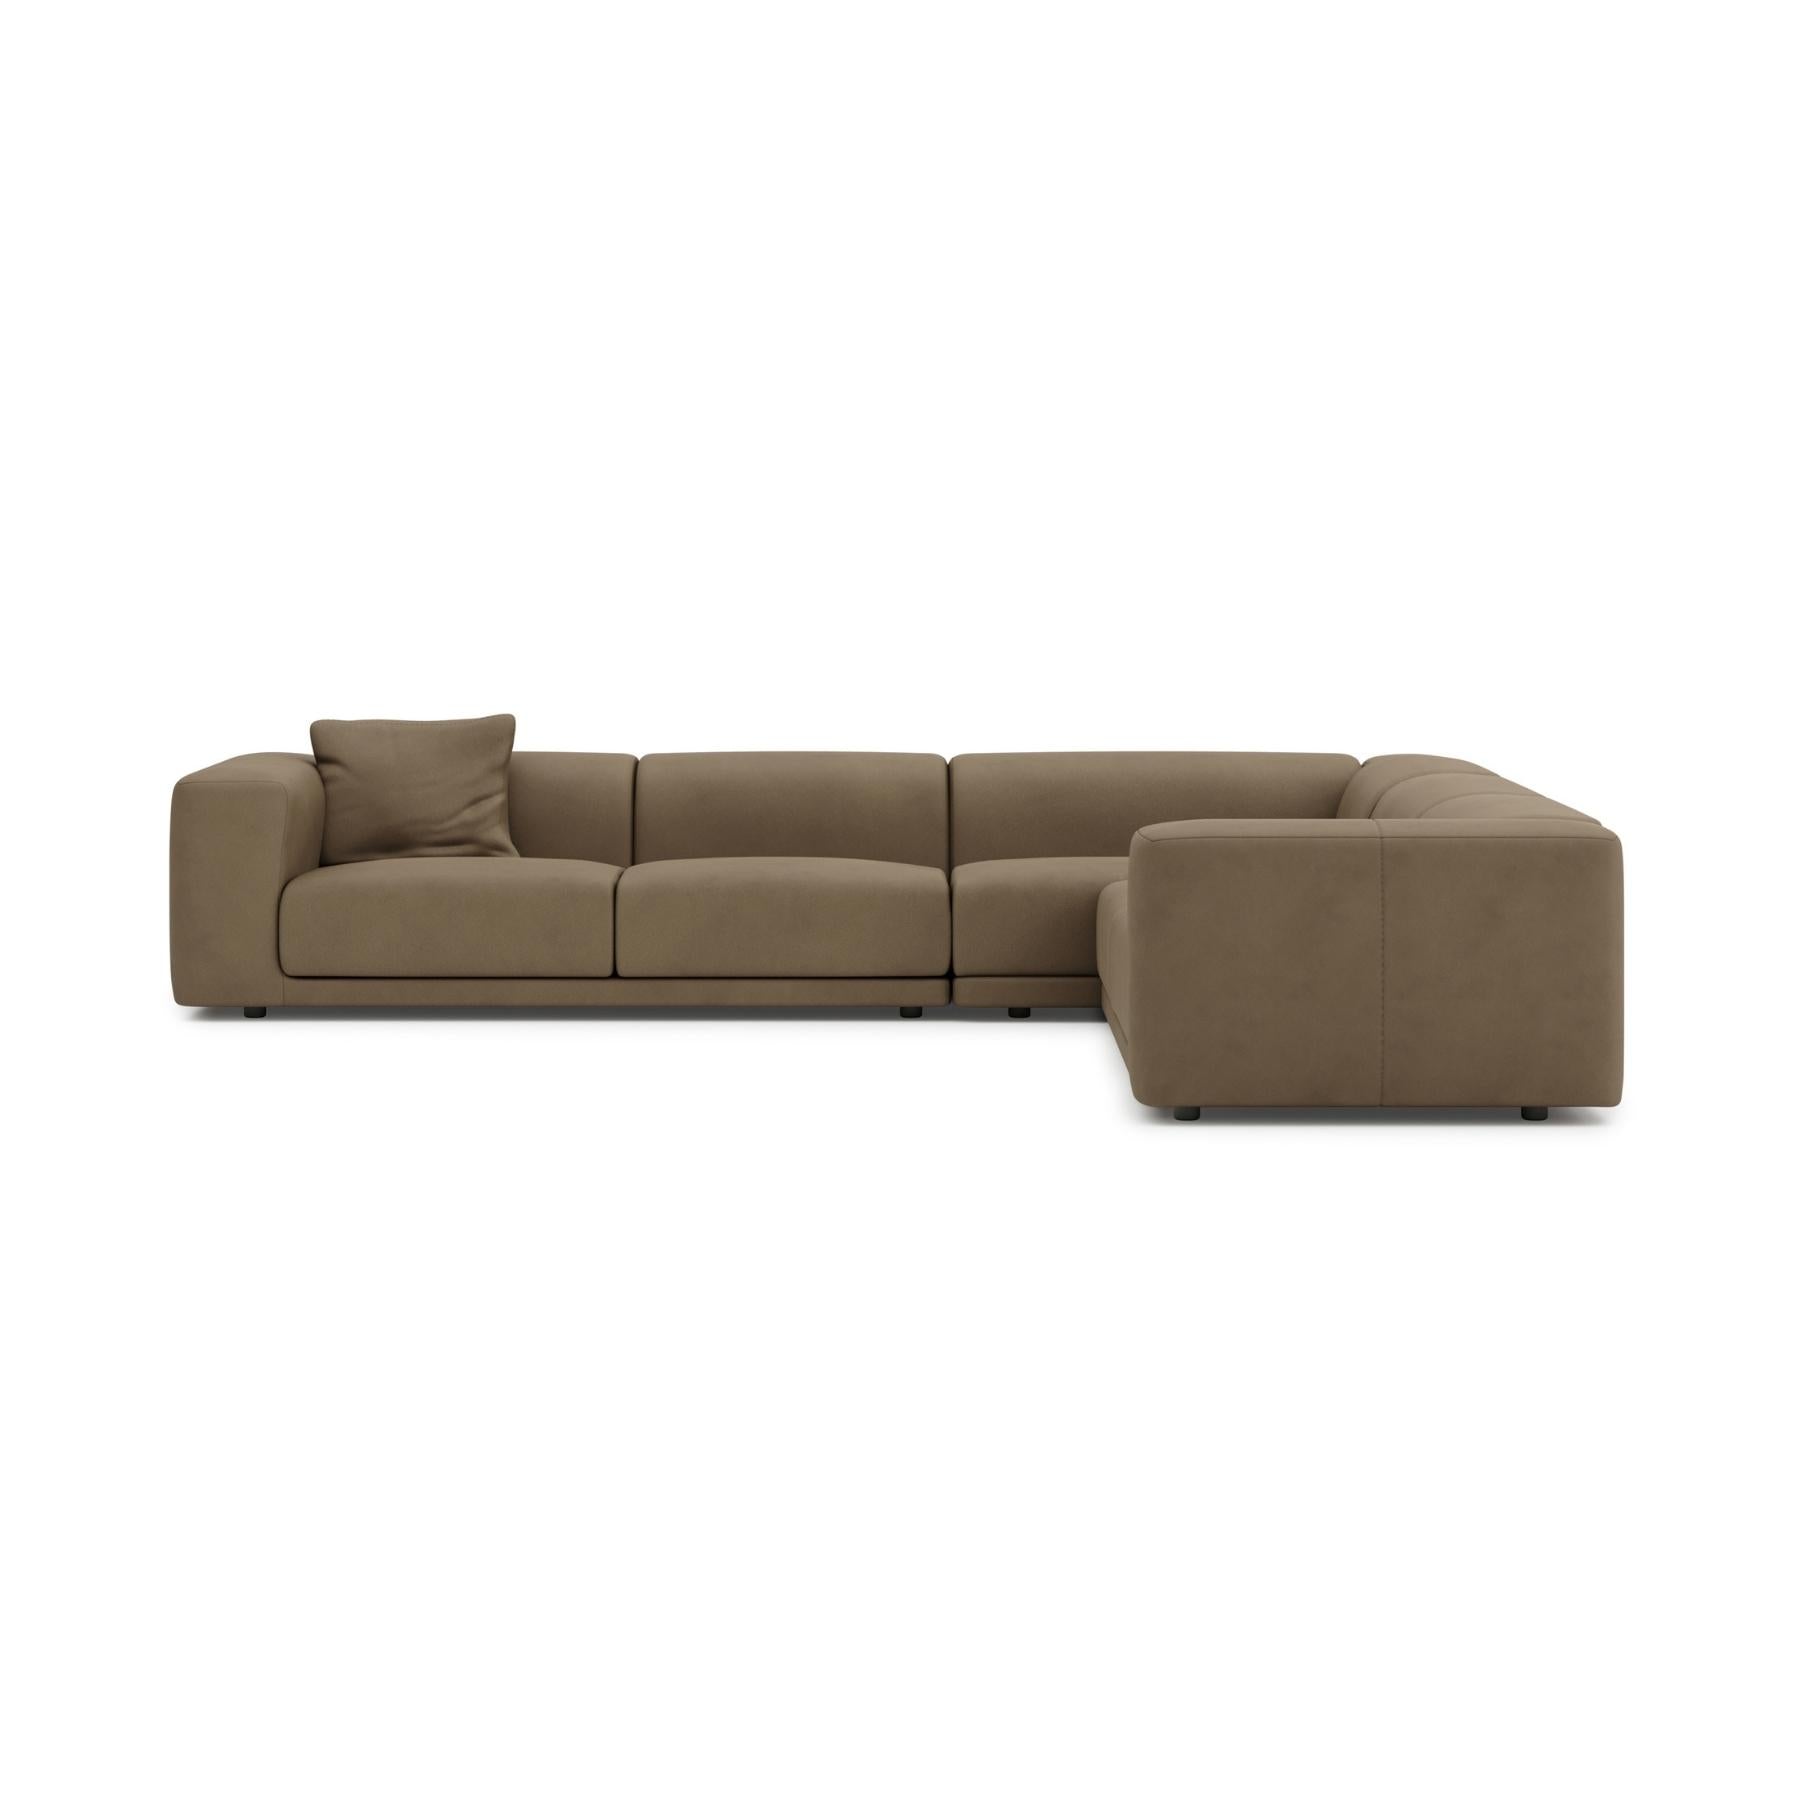 Kelston Corner Sectional Sofa | Leather - THAT COOL LIVING